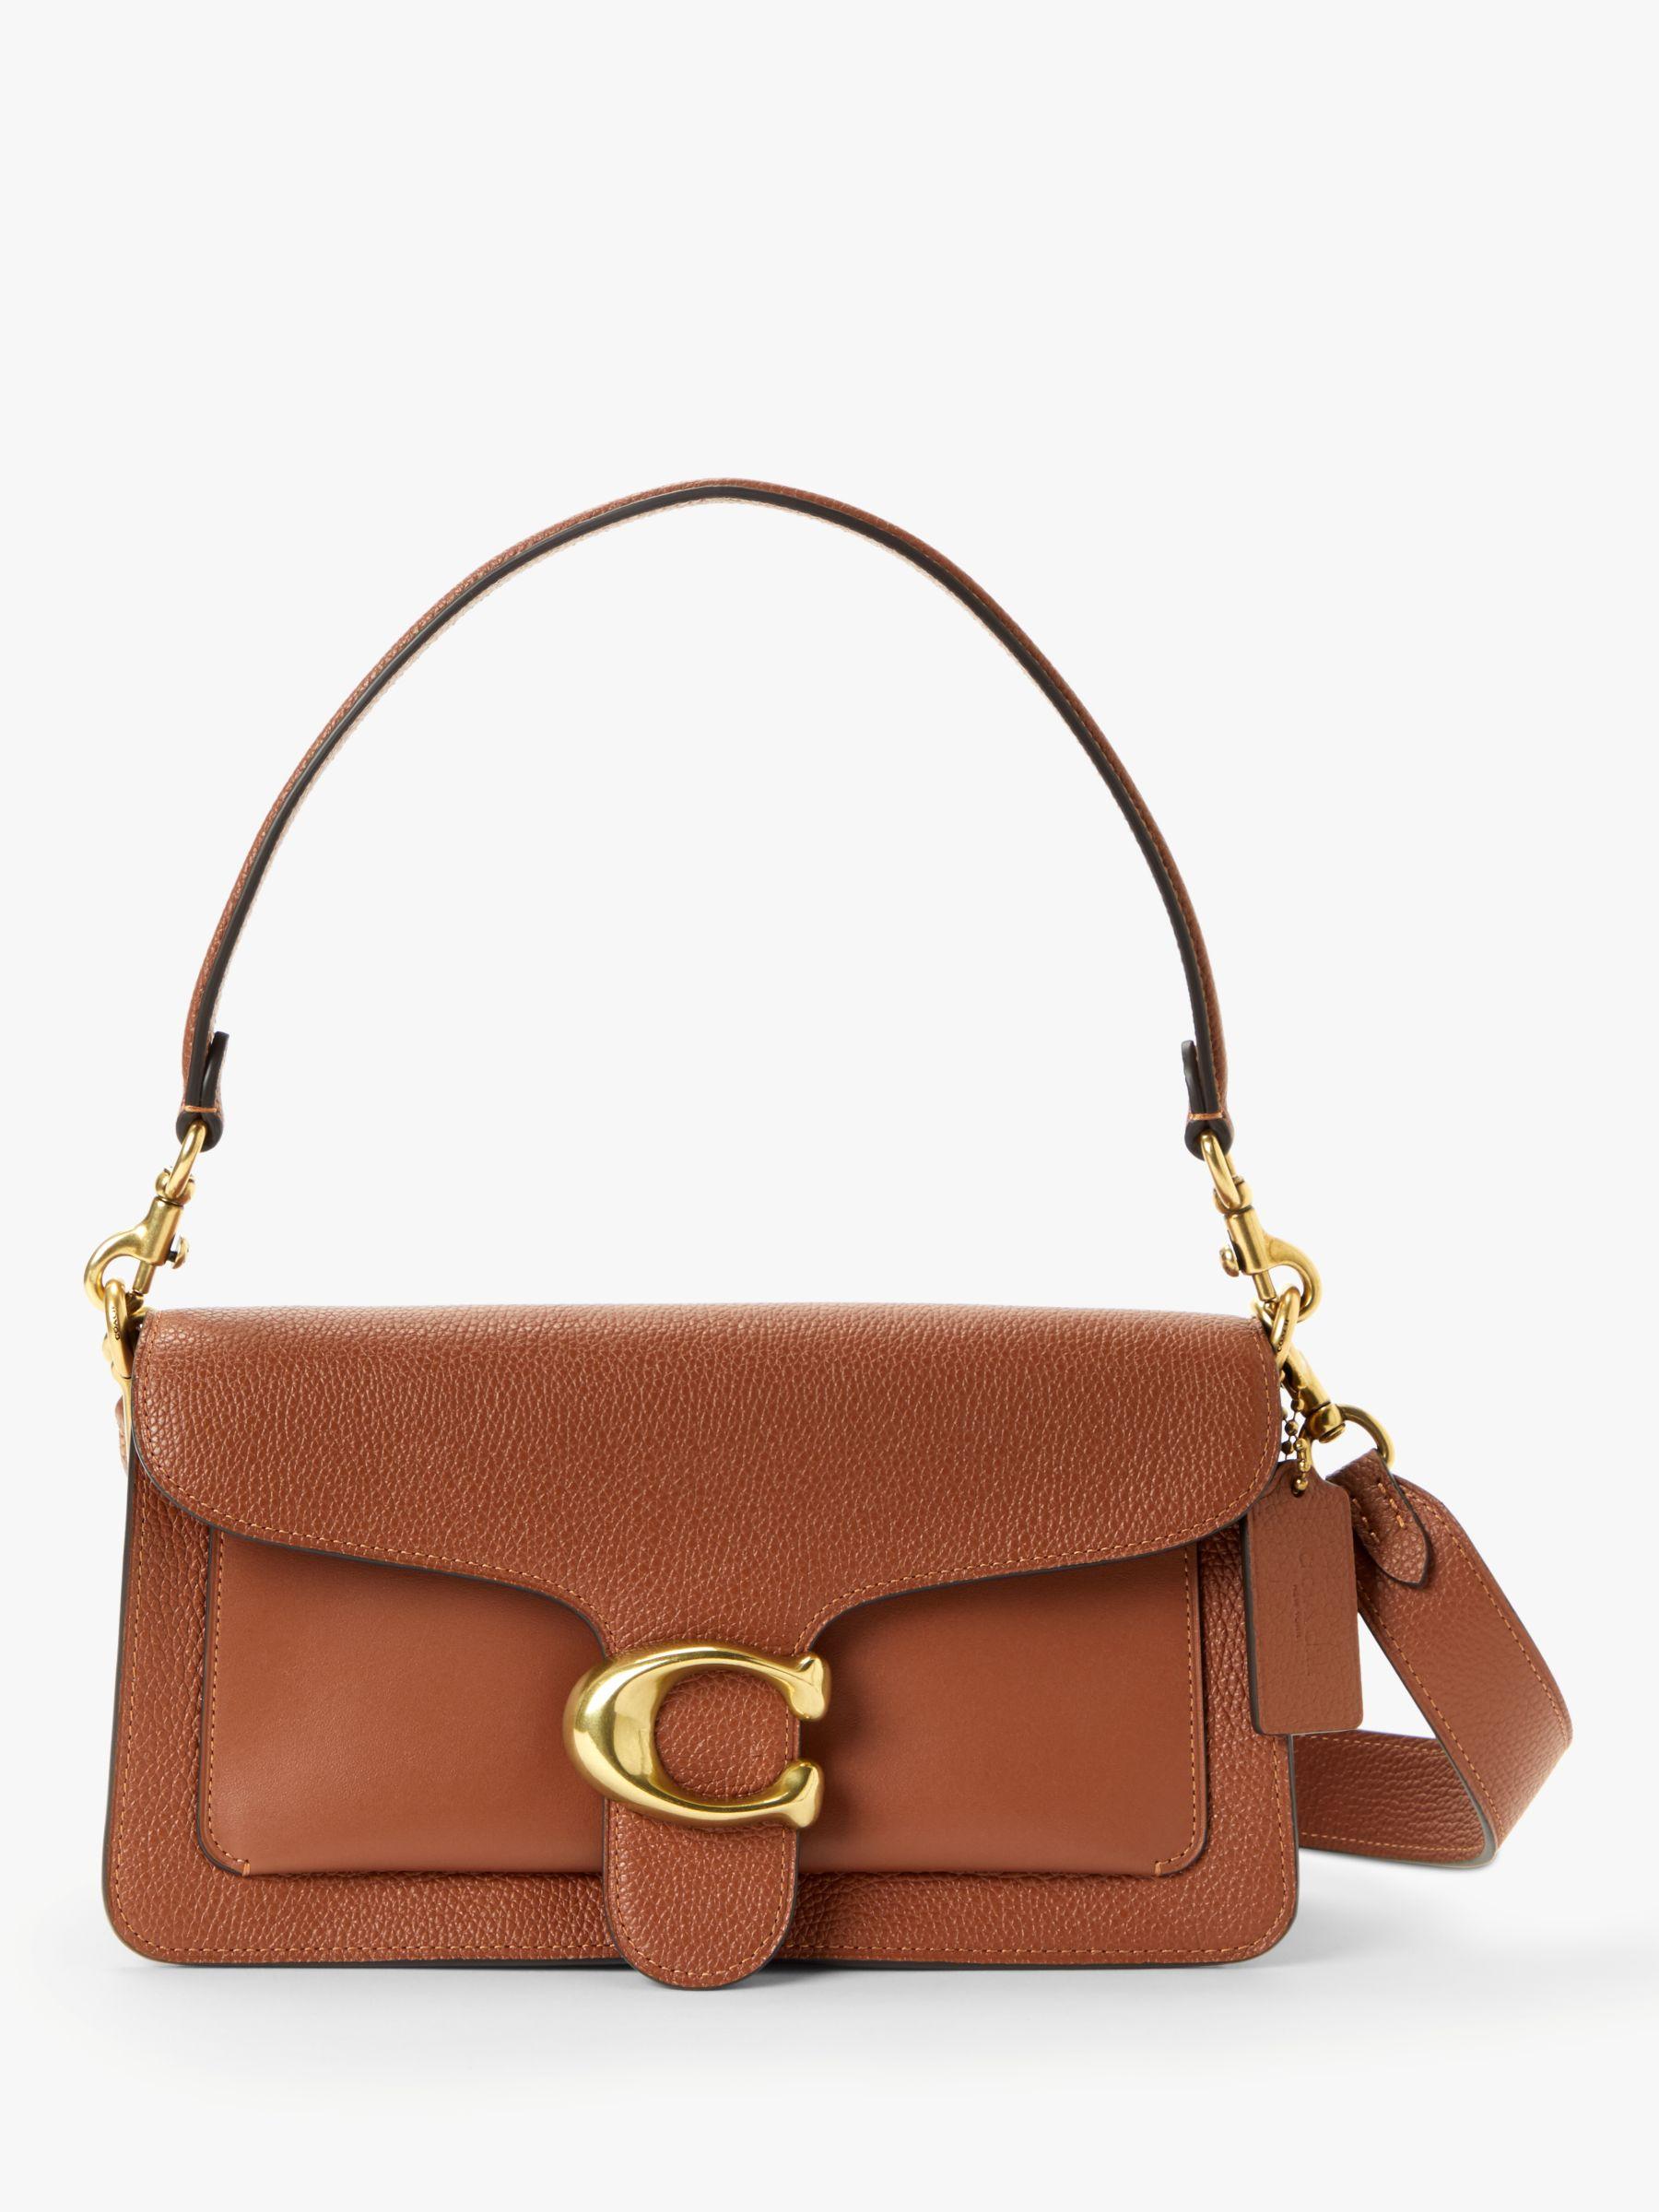 COACH Tabby 26 Leather Shoulder Bag in Brown | Lyst UK